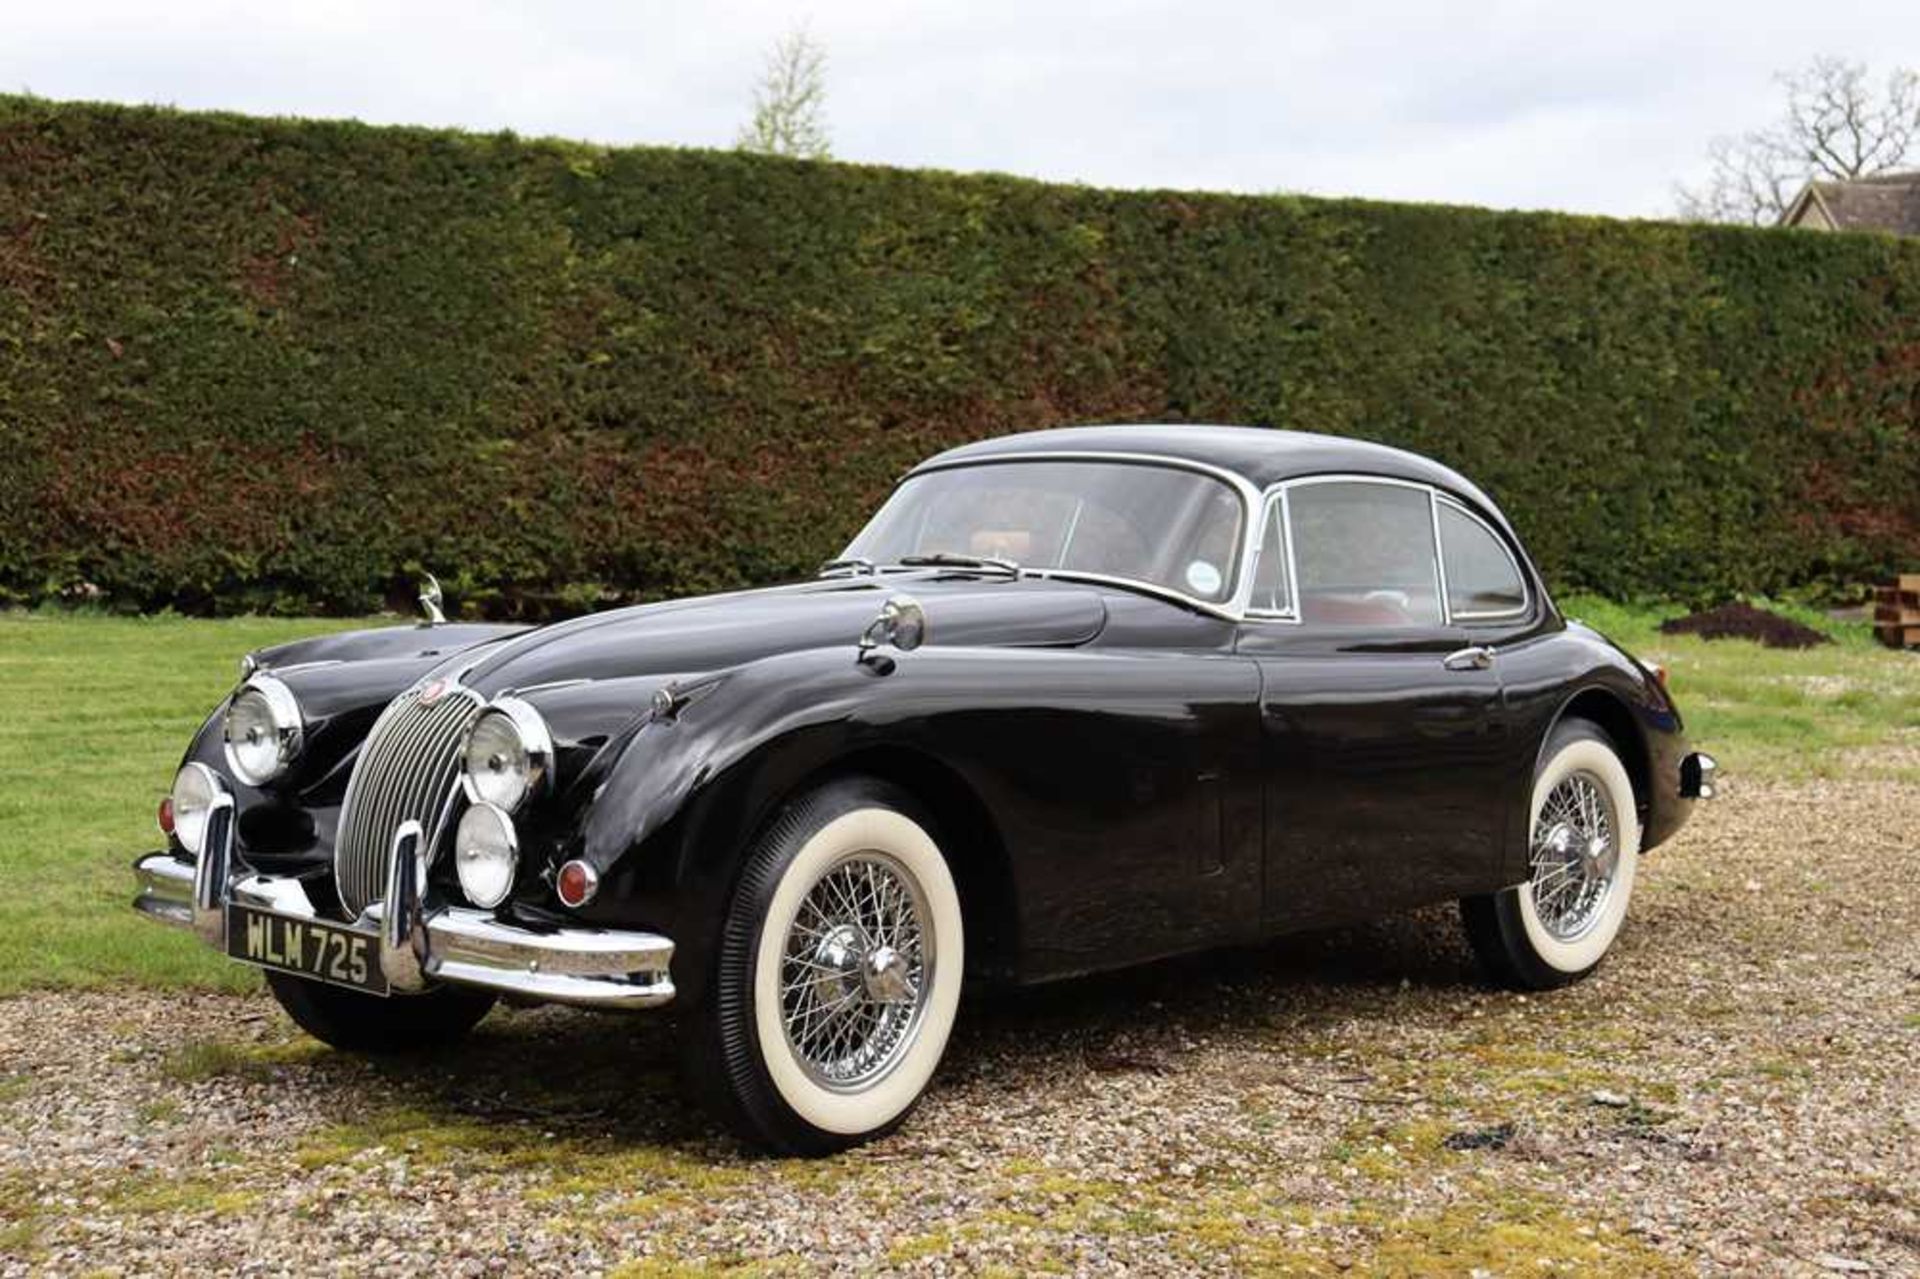 1959 Jaguar XK 150 Fixed Head Coupe 1 of just 1,368 RHD examples made - Image 6 of 49